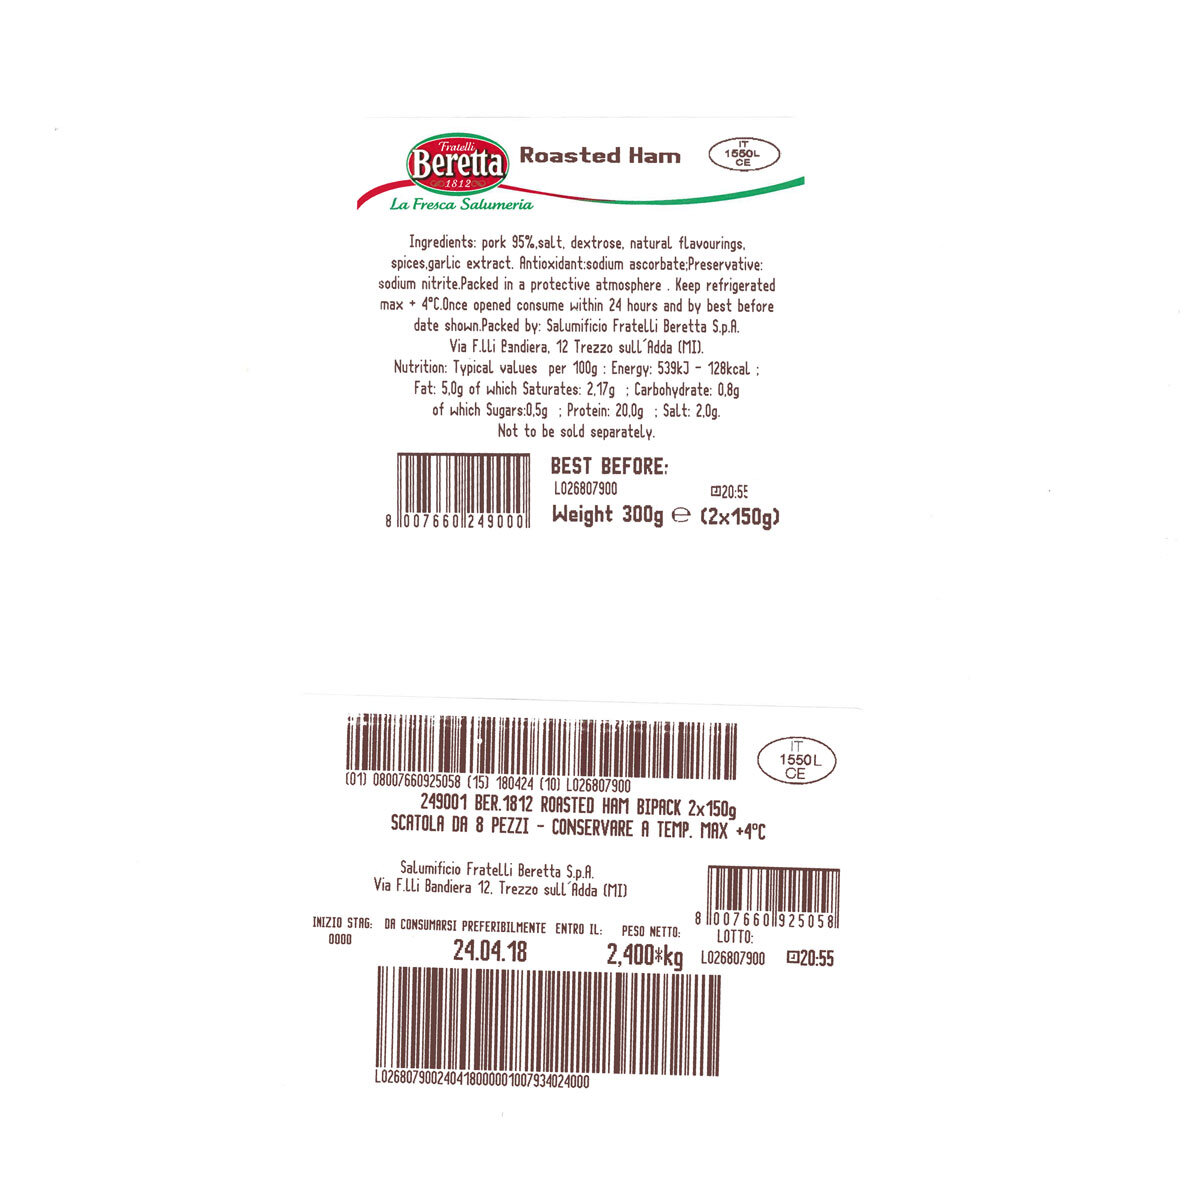 Back of pack label for 2 X 150G Pack of Beretta Roasted Ham